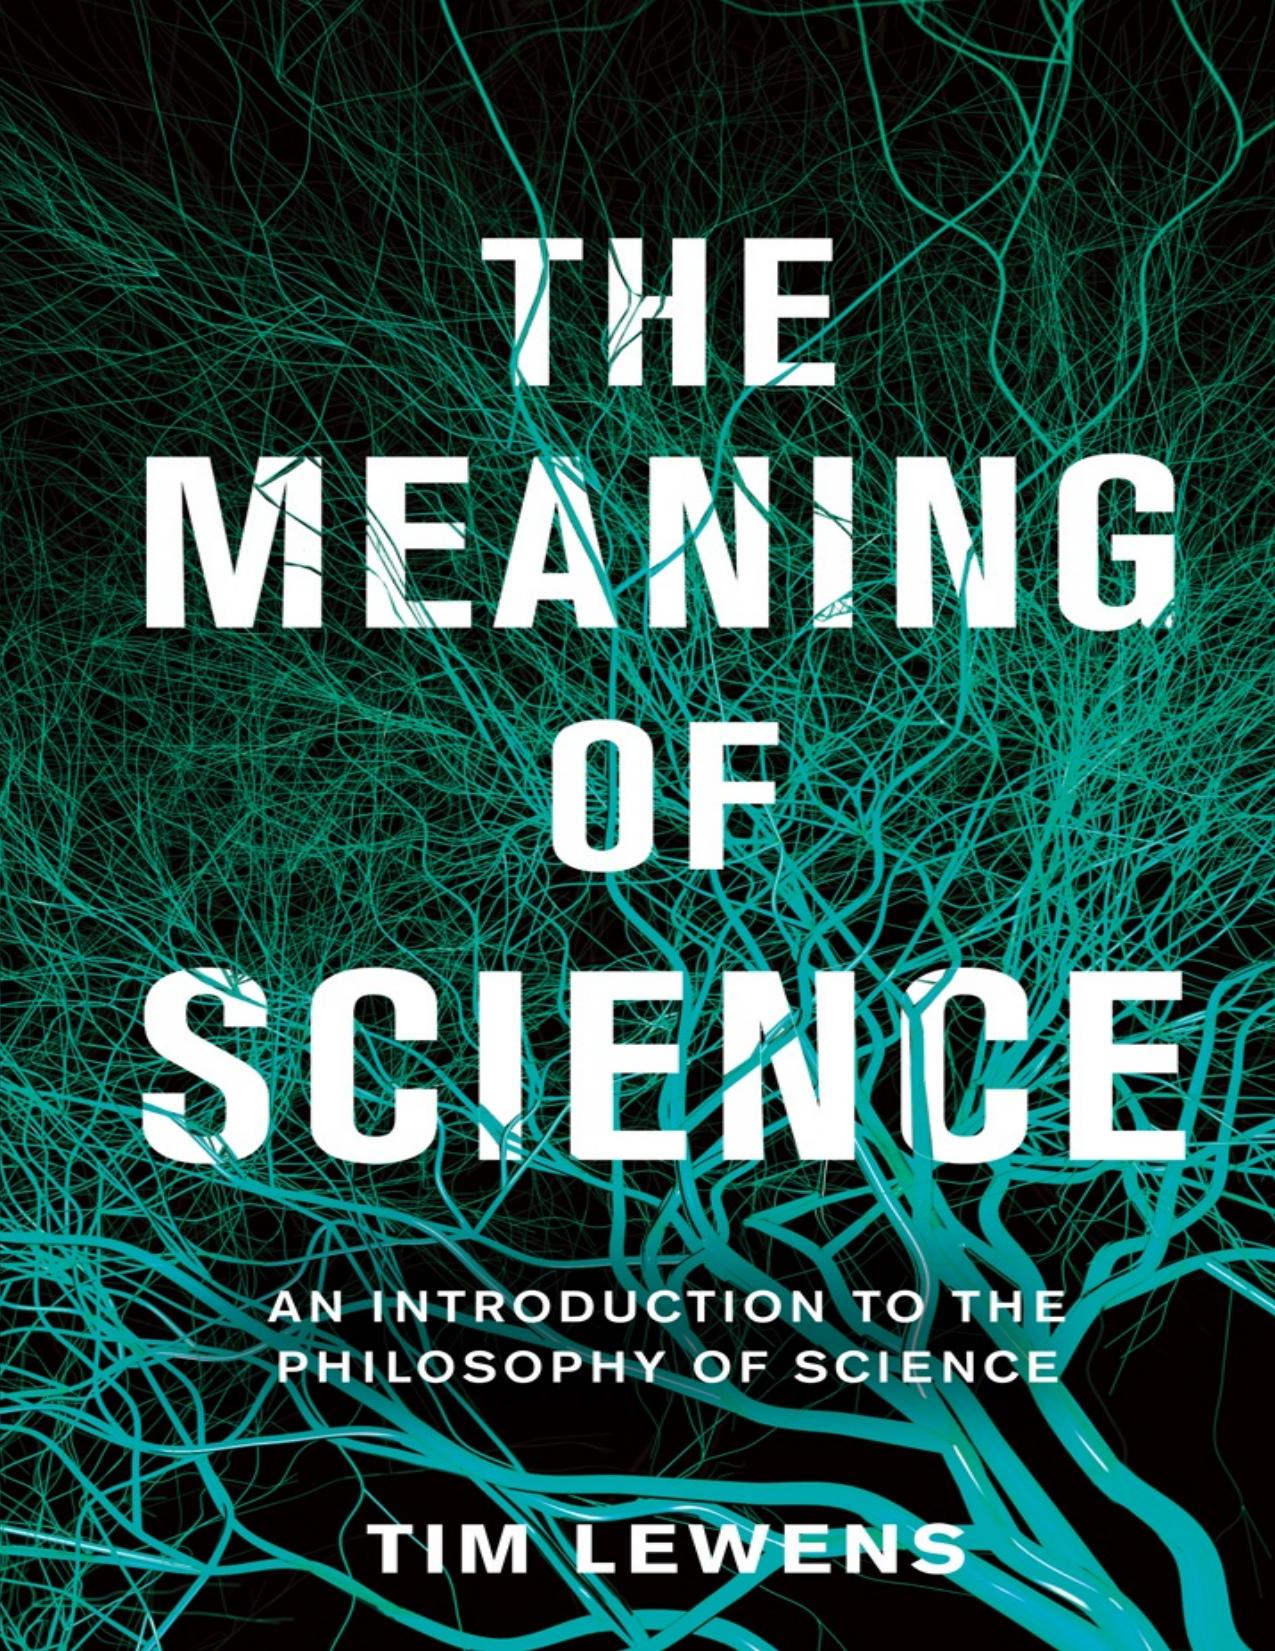 The Meaning of Science: An Introduction to the Philosophy of Science - PDFDrive.com